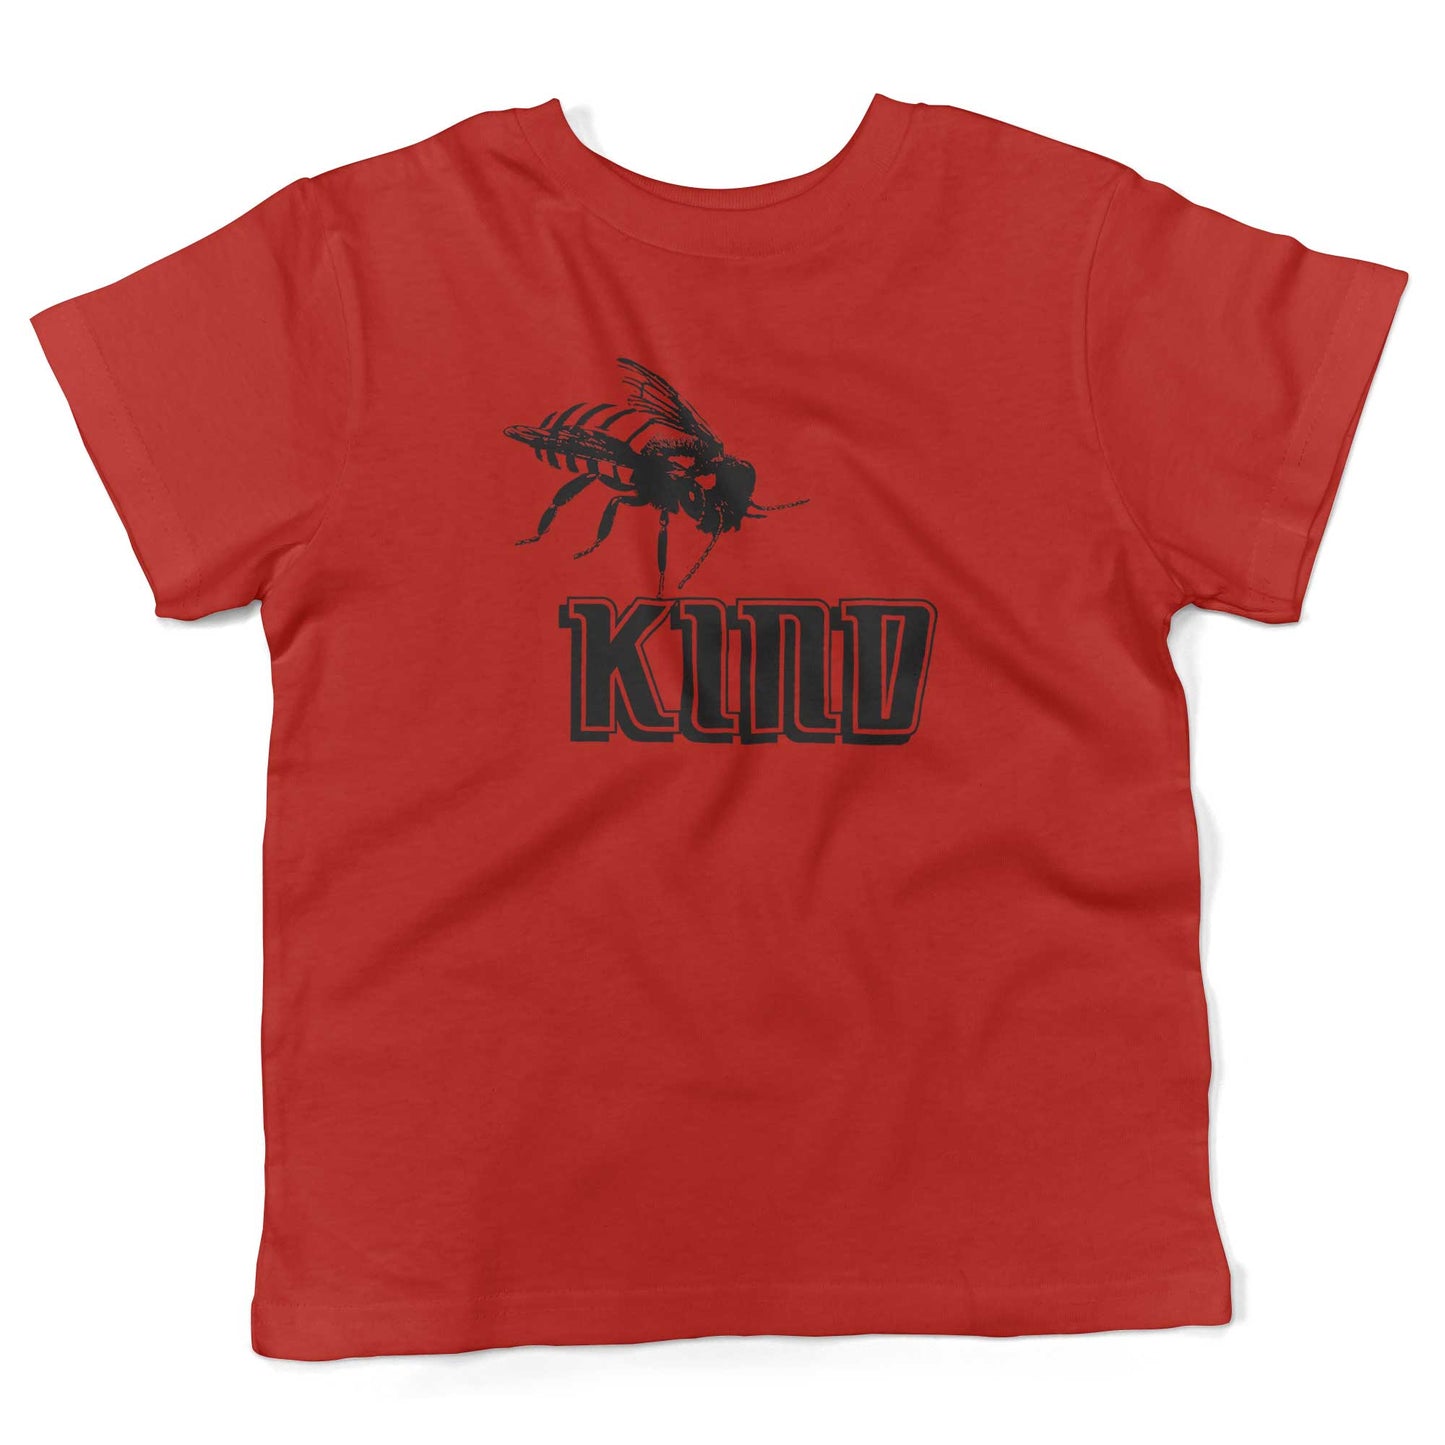 Bee Kind Toddler Shirt-Red-2T